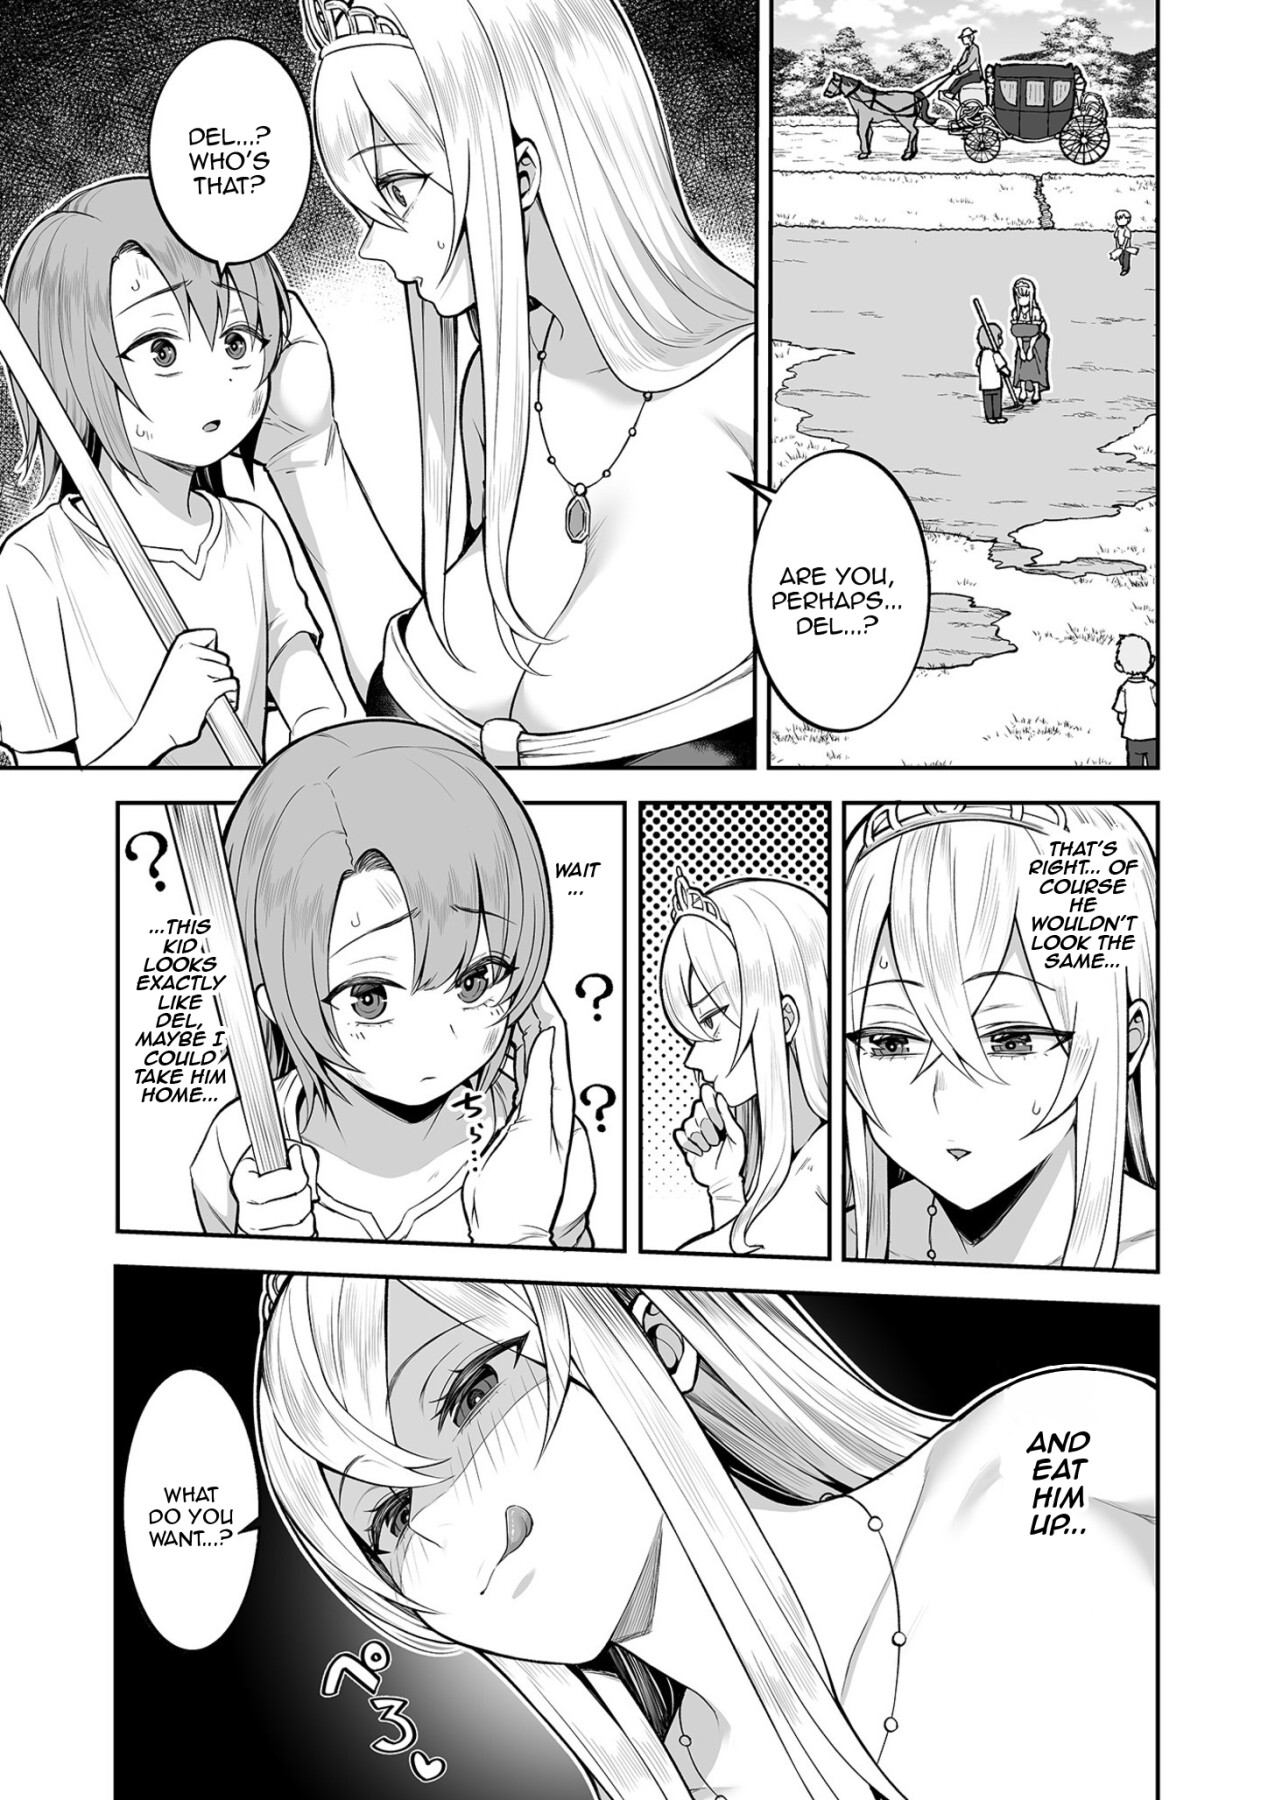 Hentai Manga Comic-The Story of Valerie ~The Queen Gets To Fuck As Much As She Wants!~-Chapter 2-3